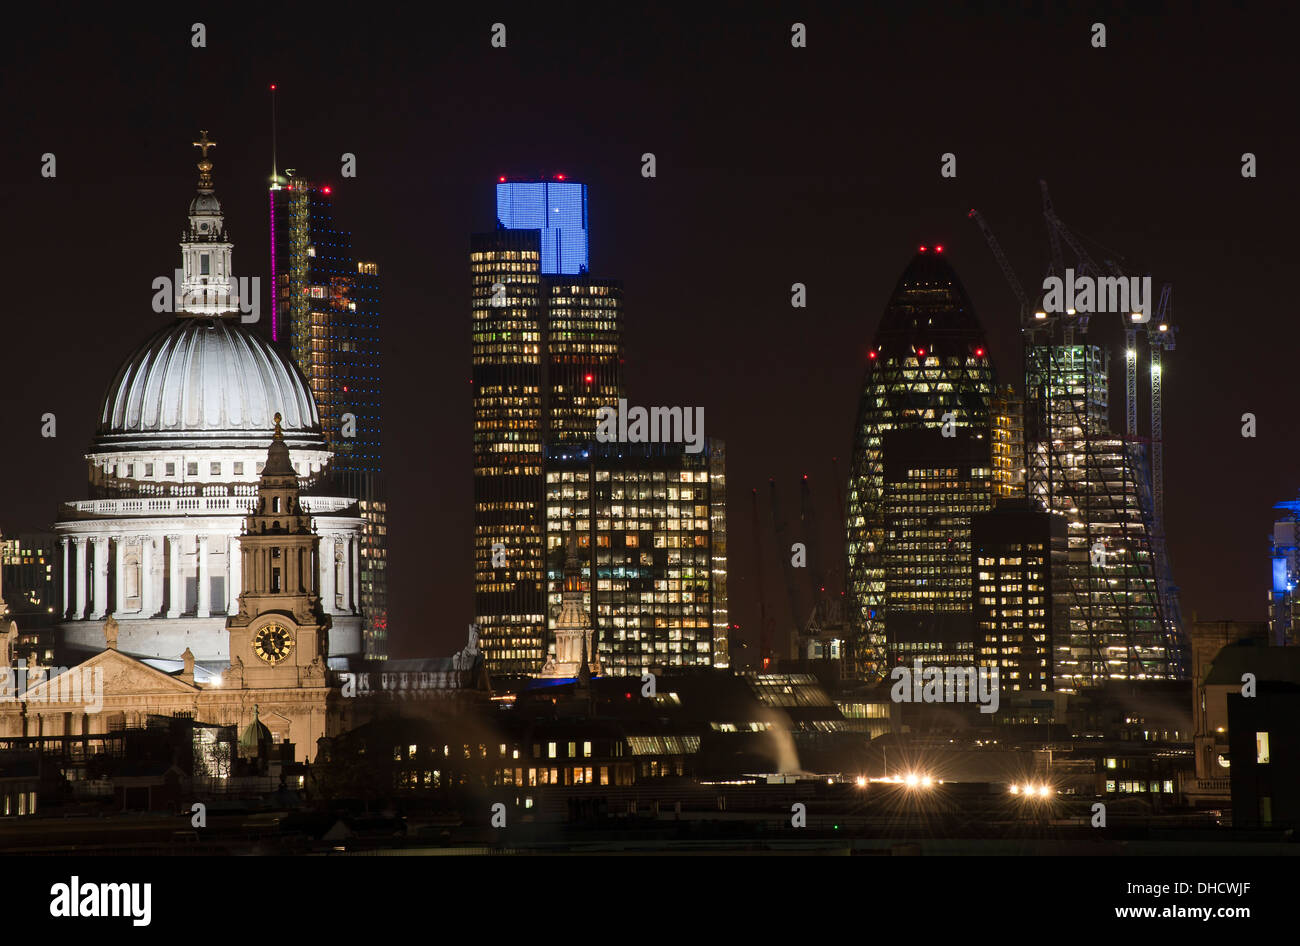 London city skyline of St Paul's Cathedral and The City including Tower 42 and The Gherkin Stock Photo